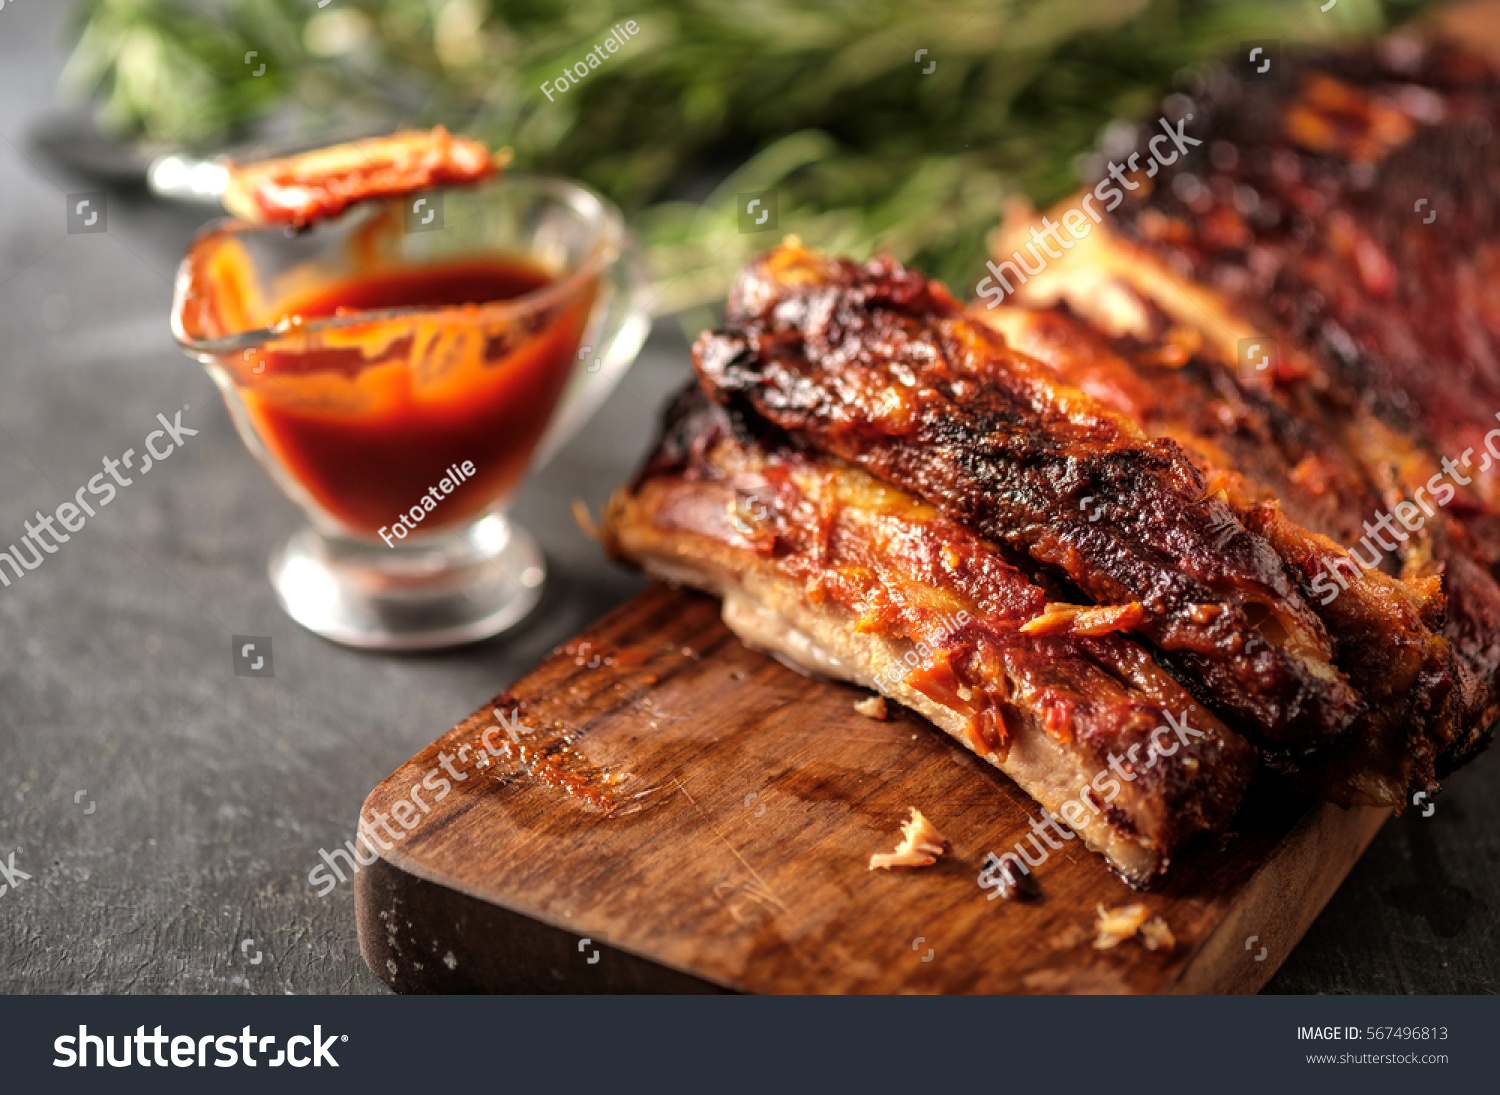 Delicious barbecued ribs seasoned with a spicy basting sauce and served with chopped fresh vegetables on an old rustic wooden chopping board in a country kitchen #567496813